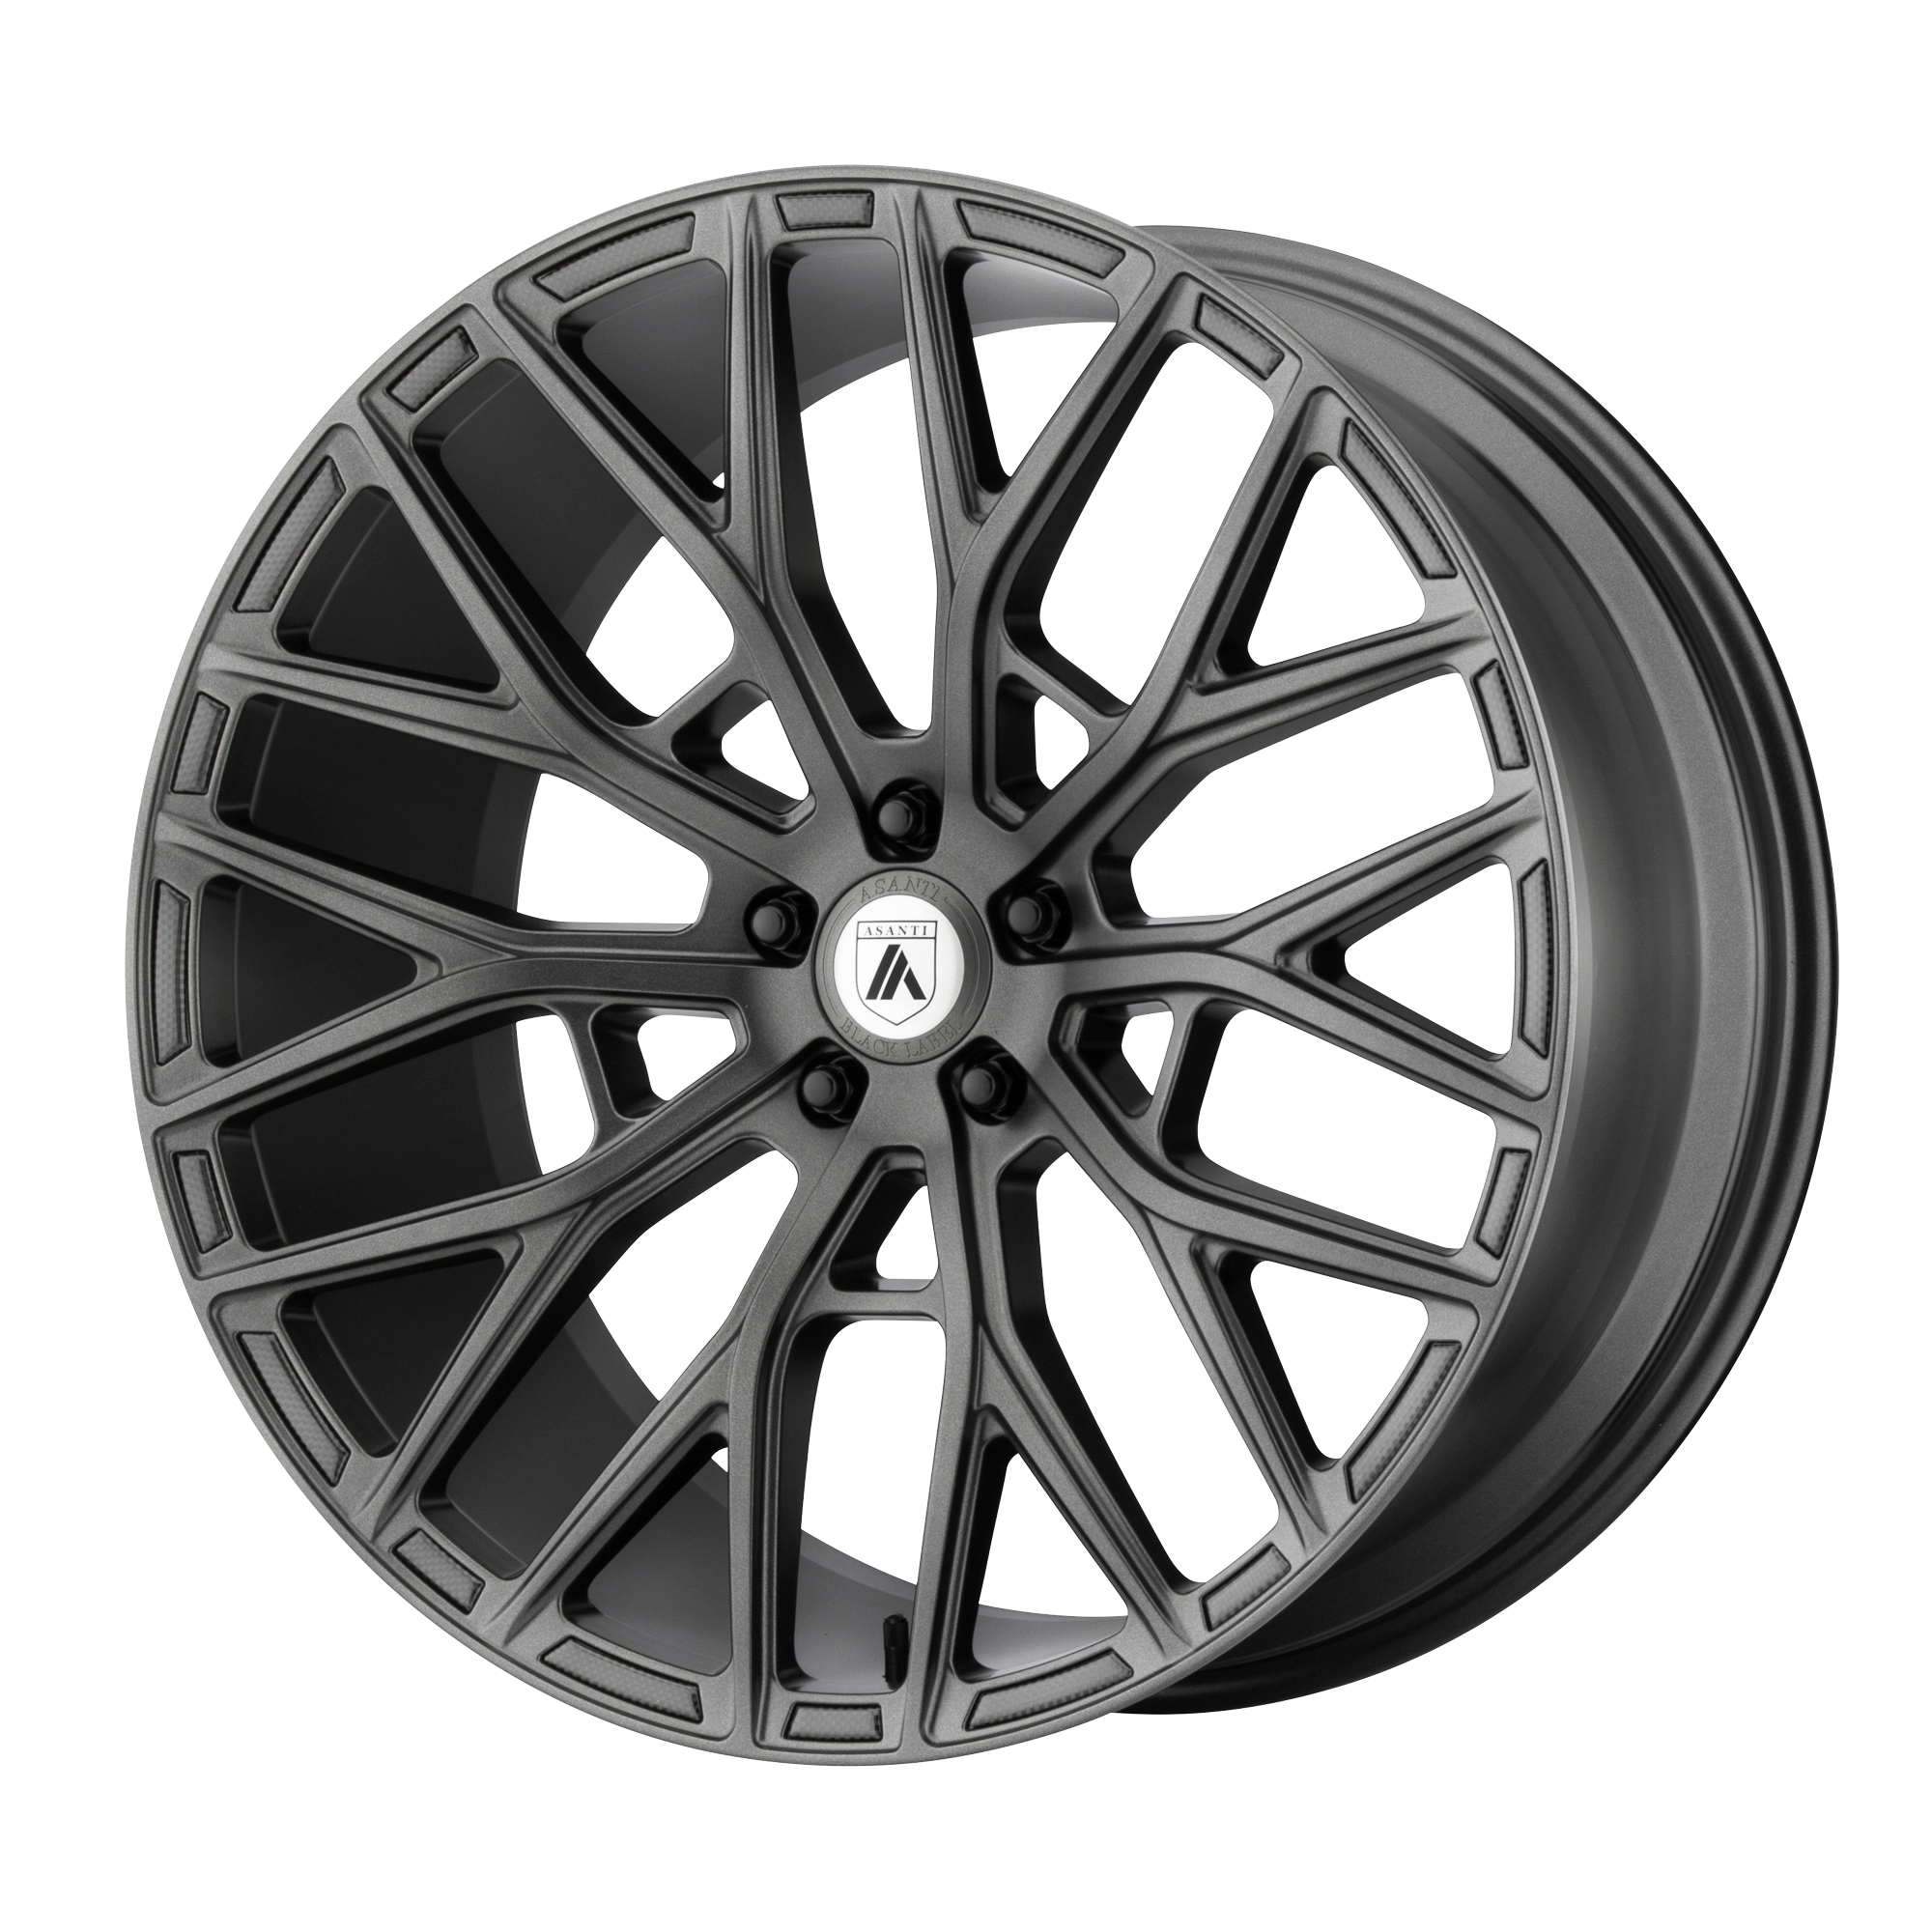 LEO 22x9 5x112.00 MATTE GRAPHITE (32 mm) - Tires and Engine Performance